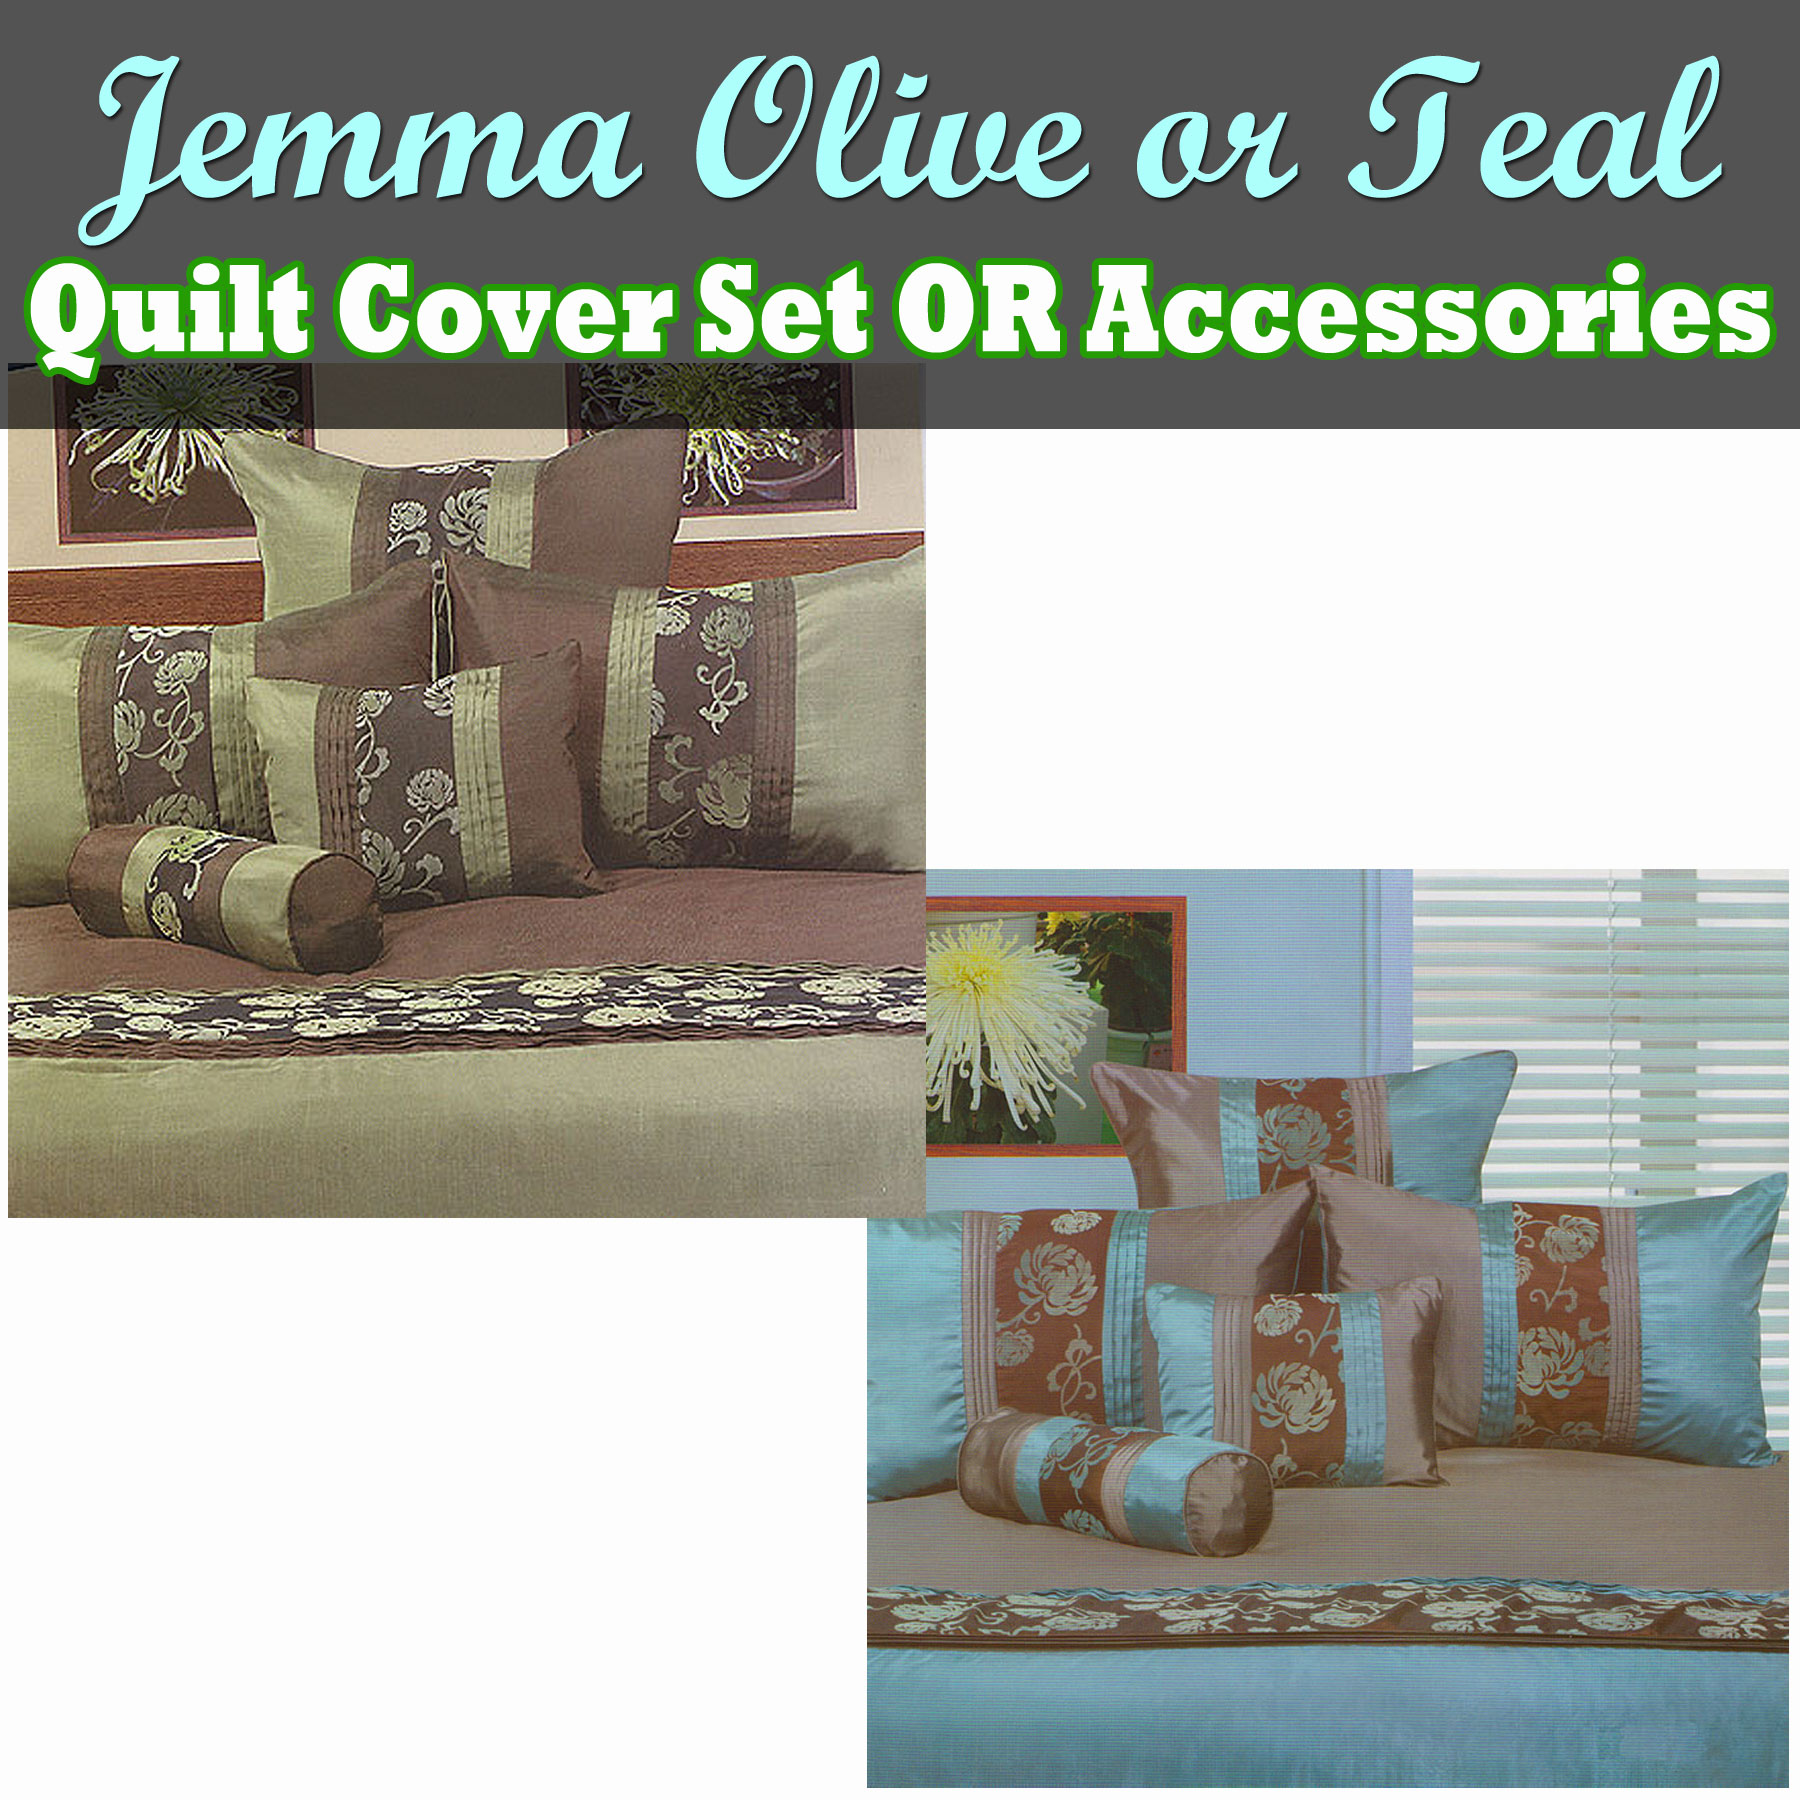 Jemma Olive or Teal Quilt Cover Set or Accessories by Phase 2